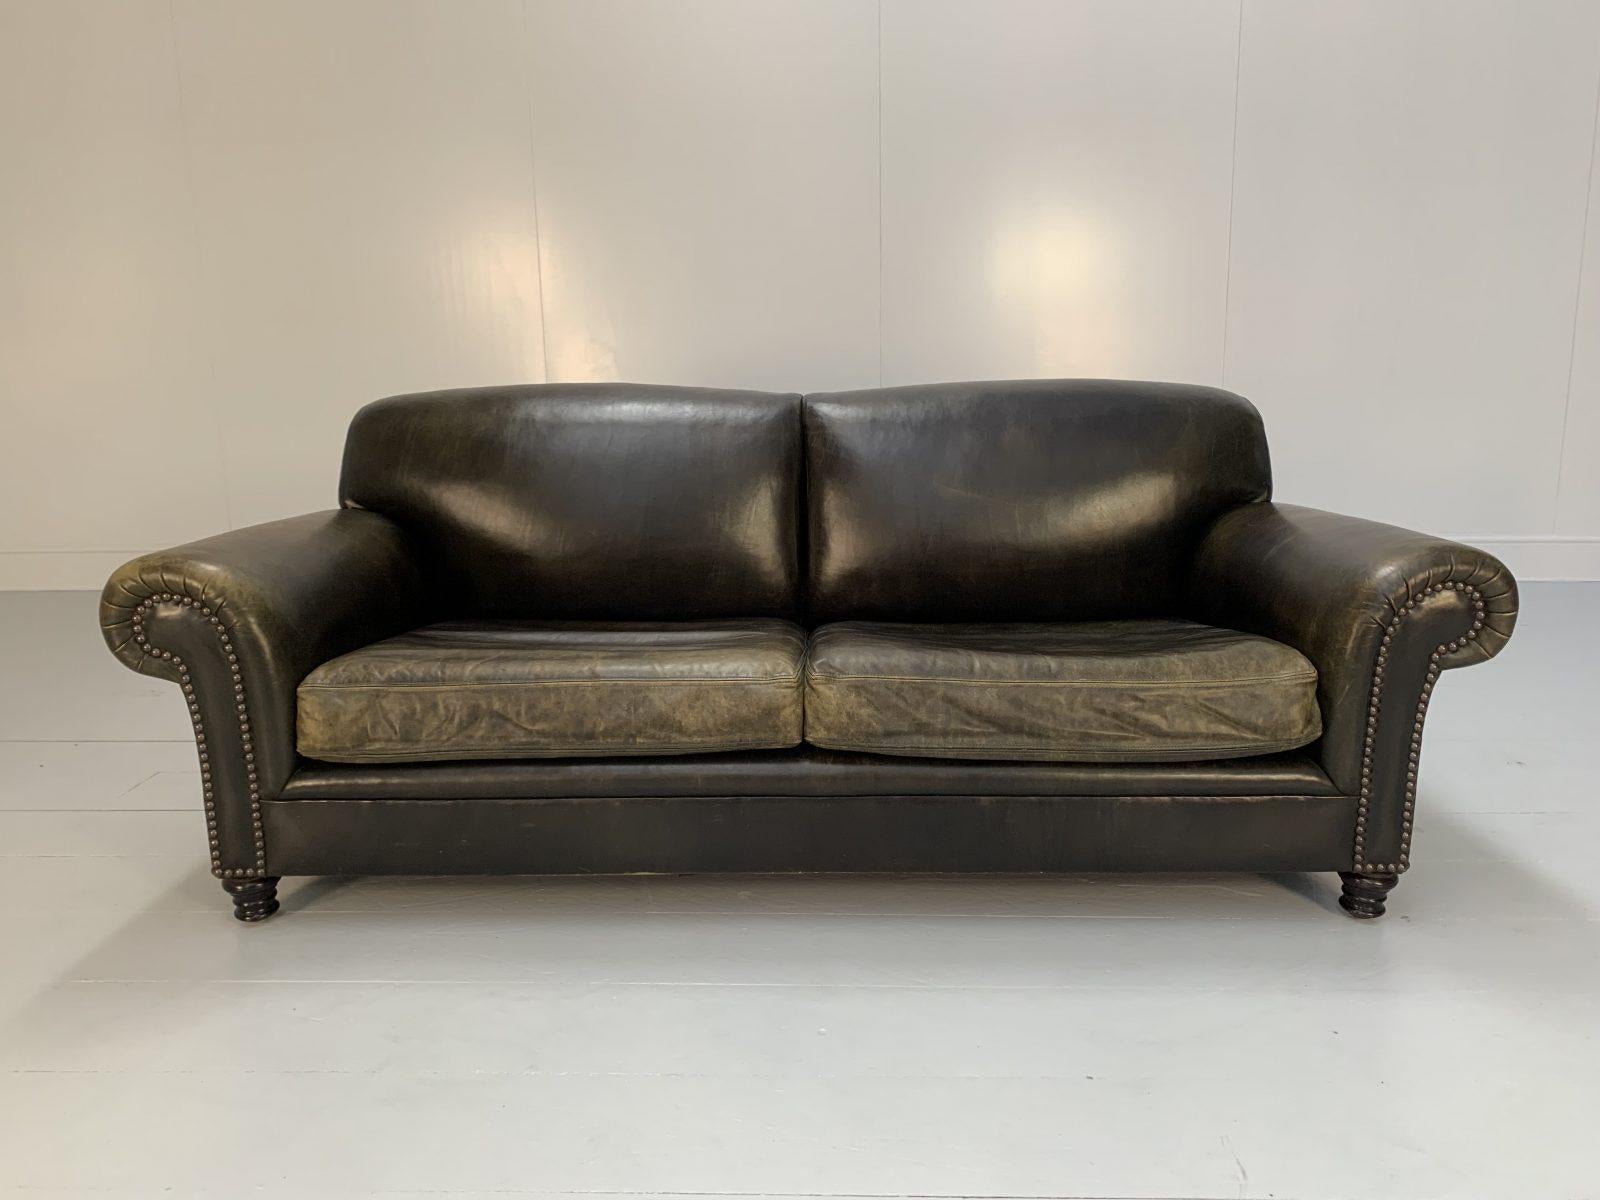 On offer on this occasion is, quite possibly, the only sofa you might ever need to buy. 

 
 
This is an ultra-rare opportunity to acquire what is, unequivocally, the best of the best, it being a most spectacular, used George Smith Signature